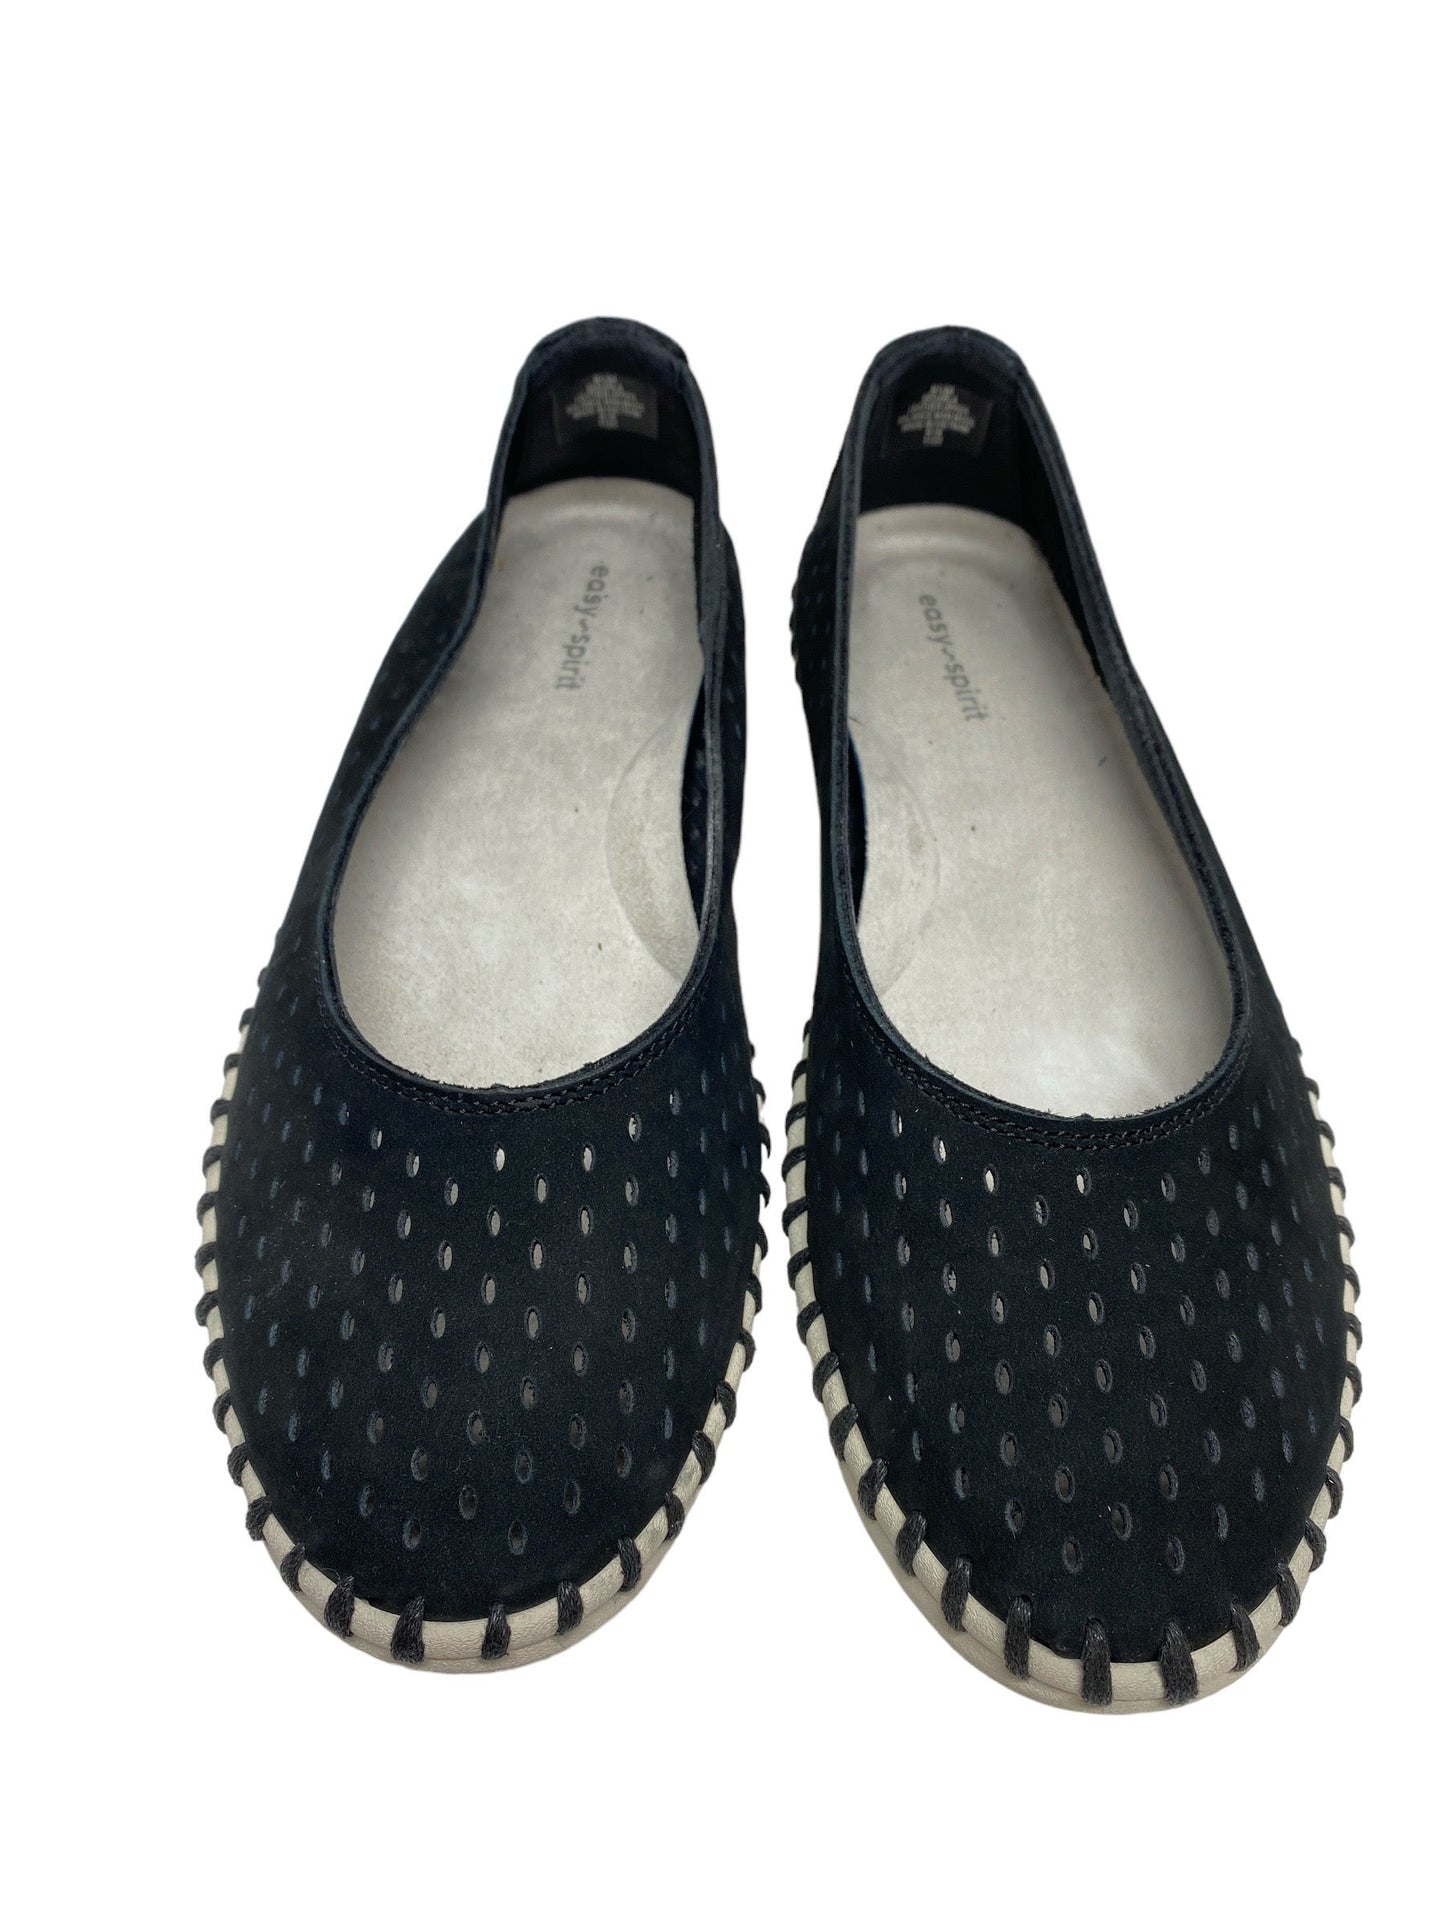 Shoes Flats By Easy Spirit  Size: 8.5